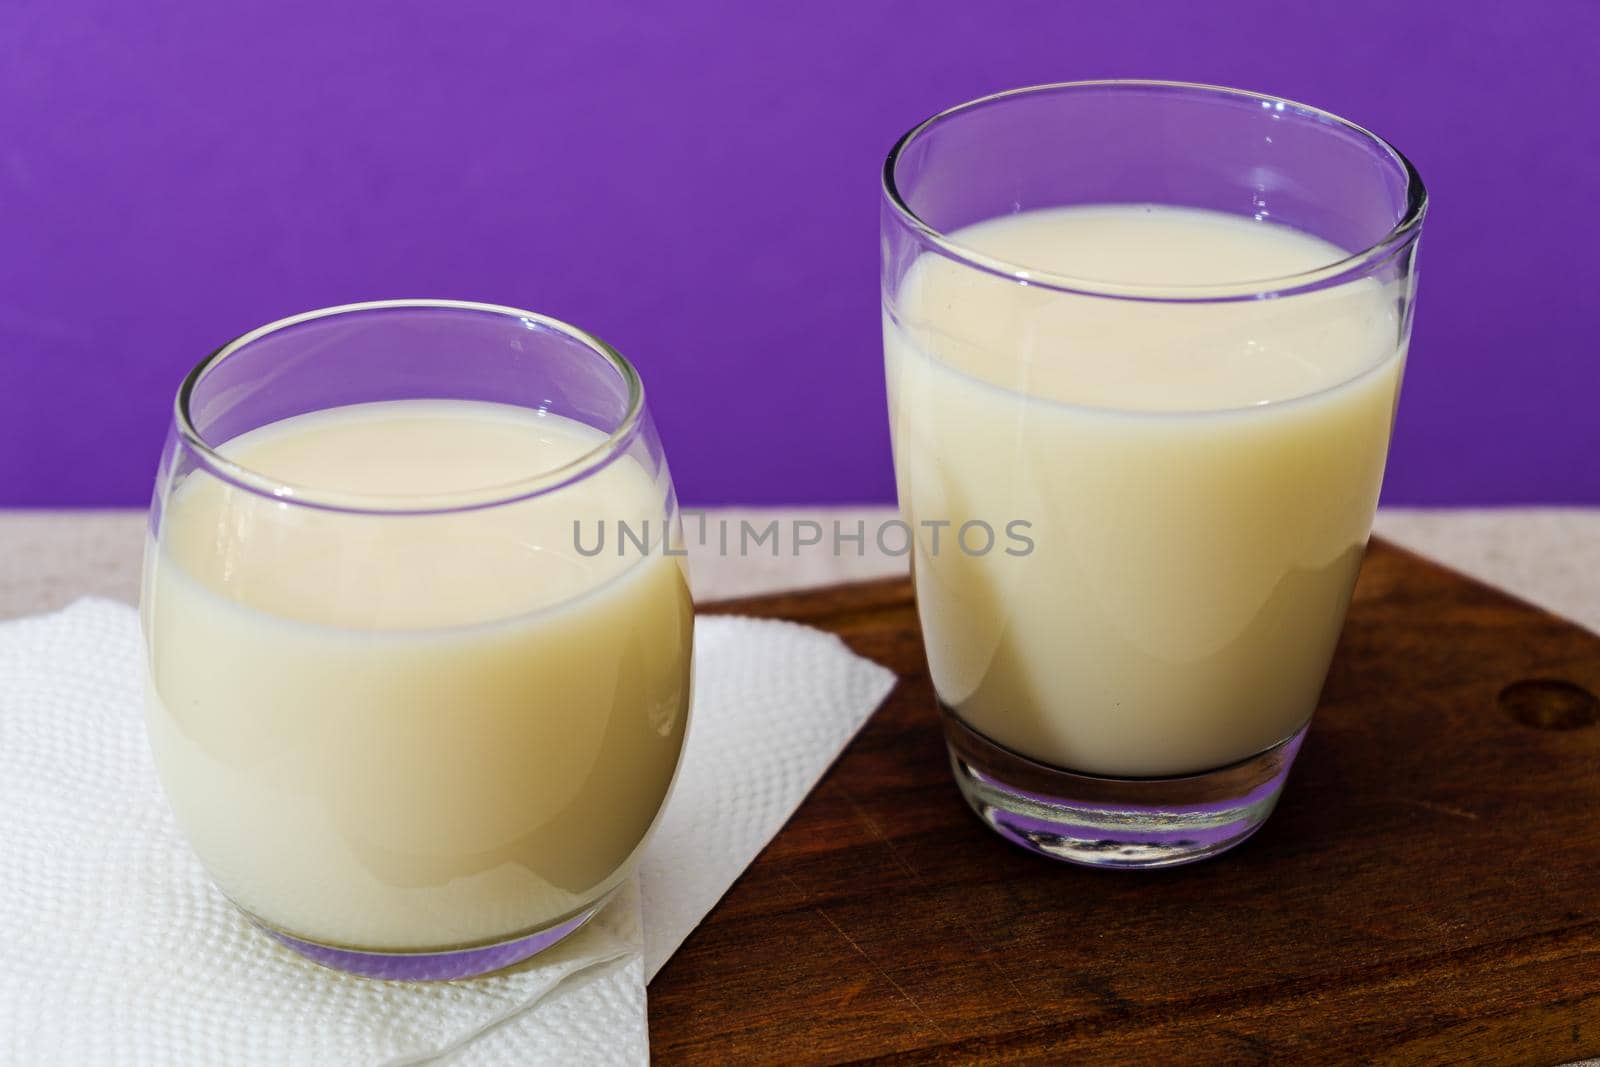 Two glasses of milk of different shape and volume on a wooden board on a table. Healthy Drink. close up